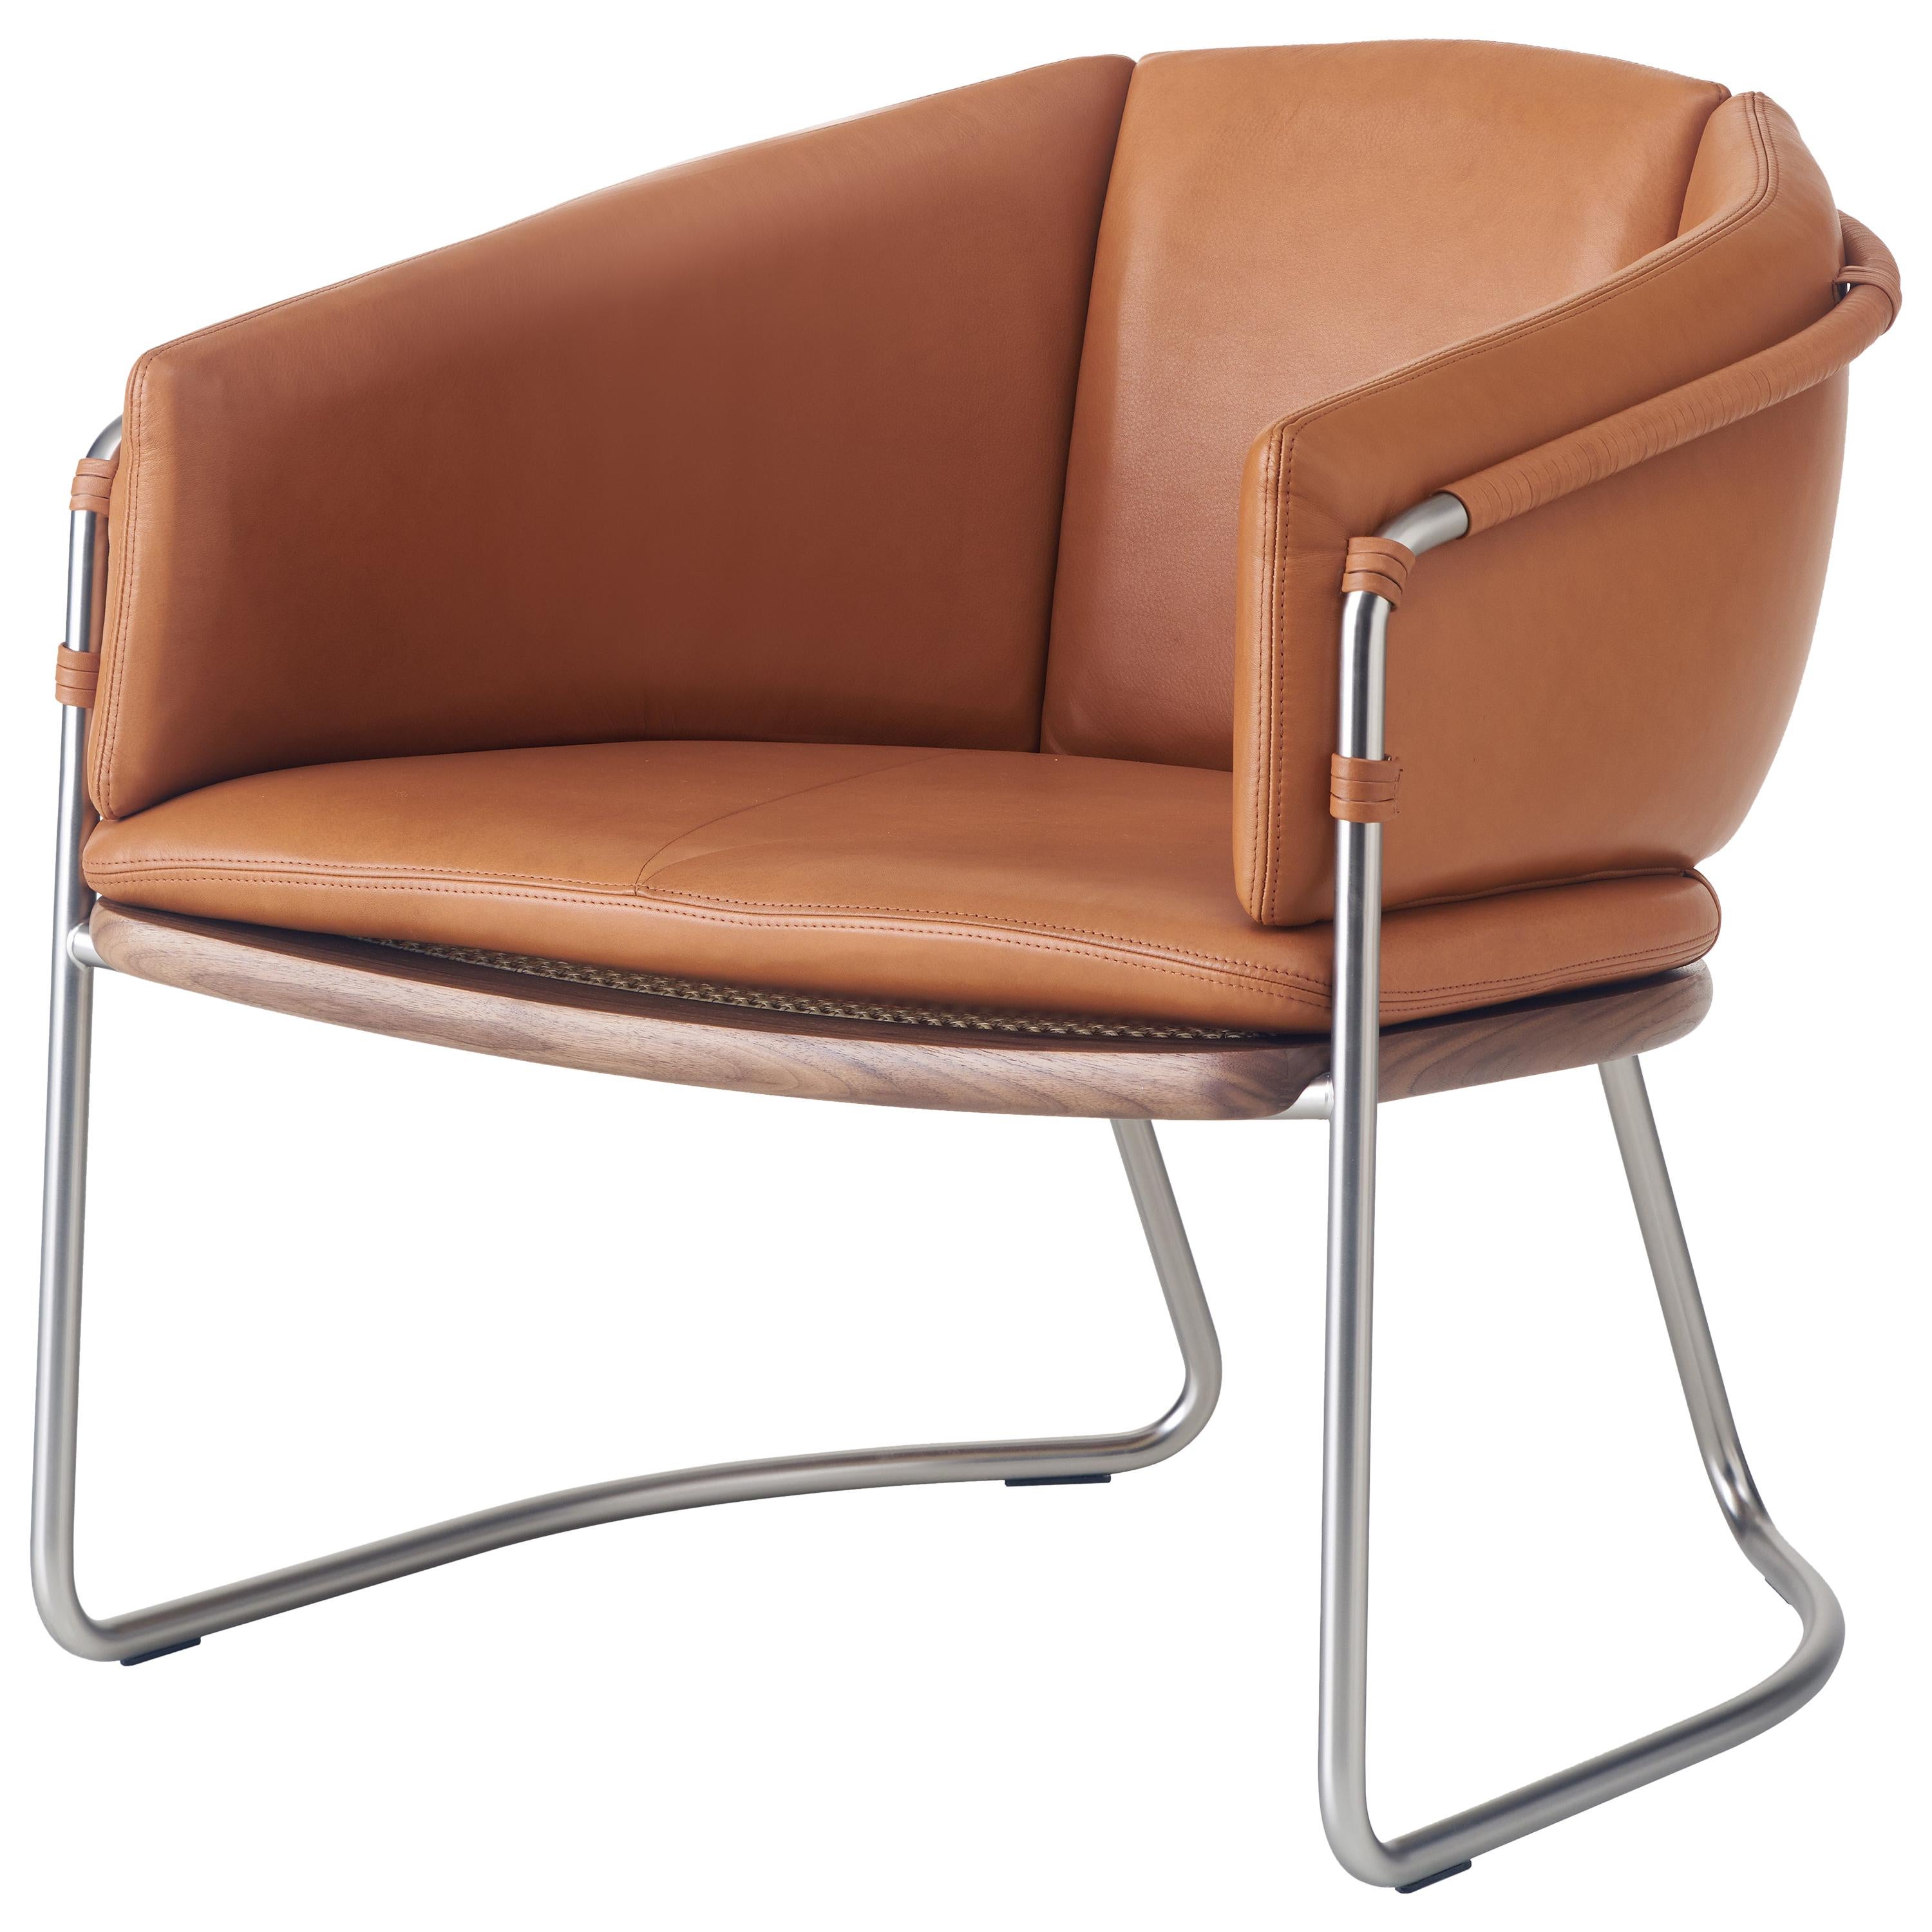 For Sale: Brown (Elegant 43807 British Tan) Geometric Lounge Chair in Walnut, Satin Nickel and Leather by Craig Bassam